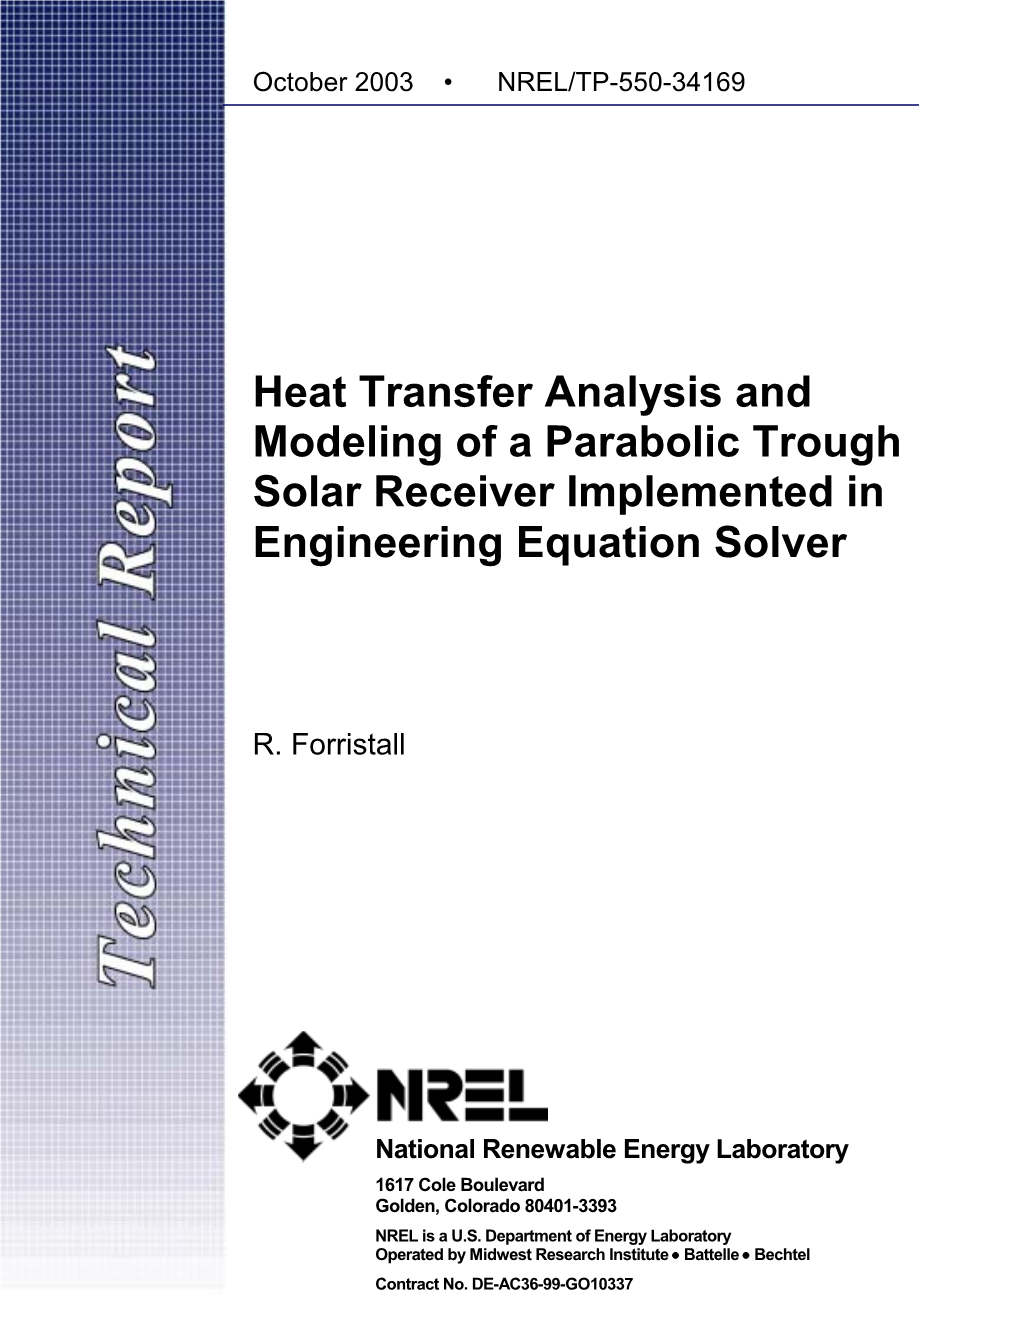 Heat Transfer Analysis and Modeling of a Parabolic Trough Solar Receiver Implemented in Engineering Equation Solver